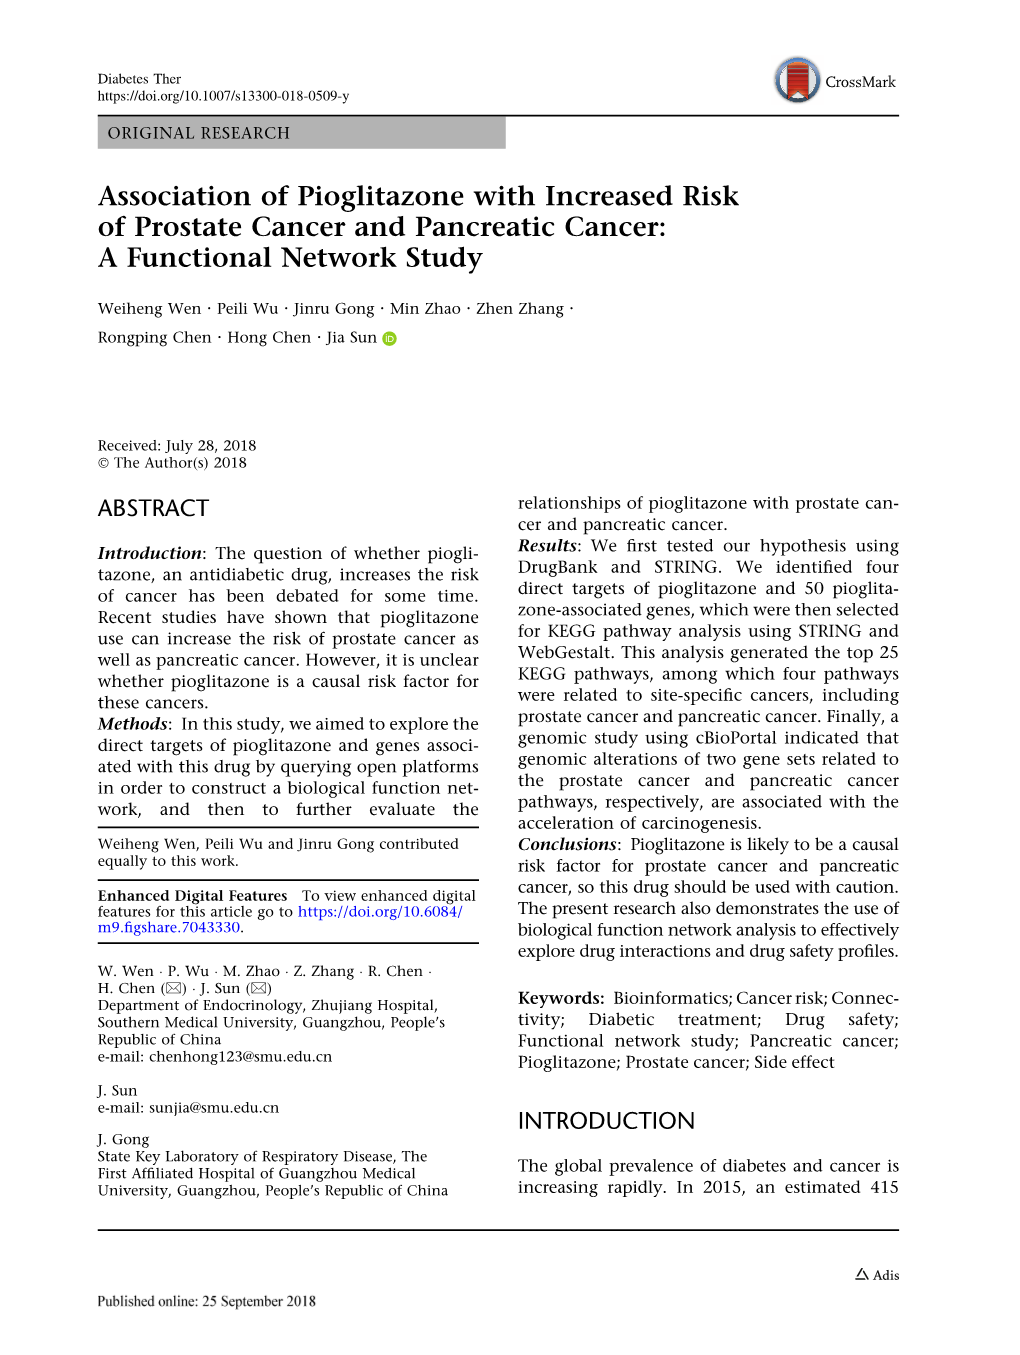 Association of Pioglitazone with Increased Risk of Prostate Cancer and Pancreatic Cancer: a Functional Network Study